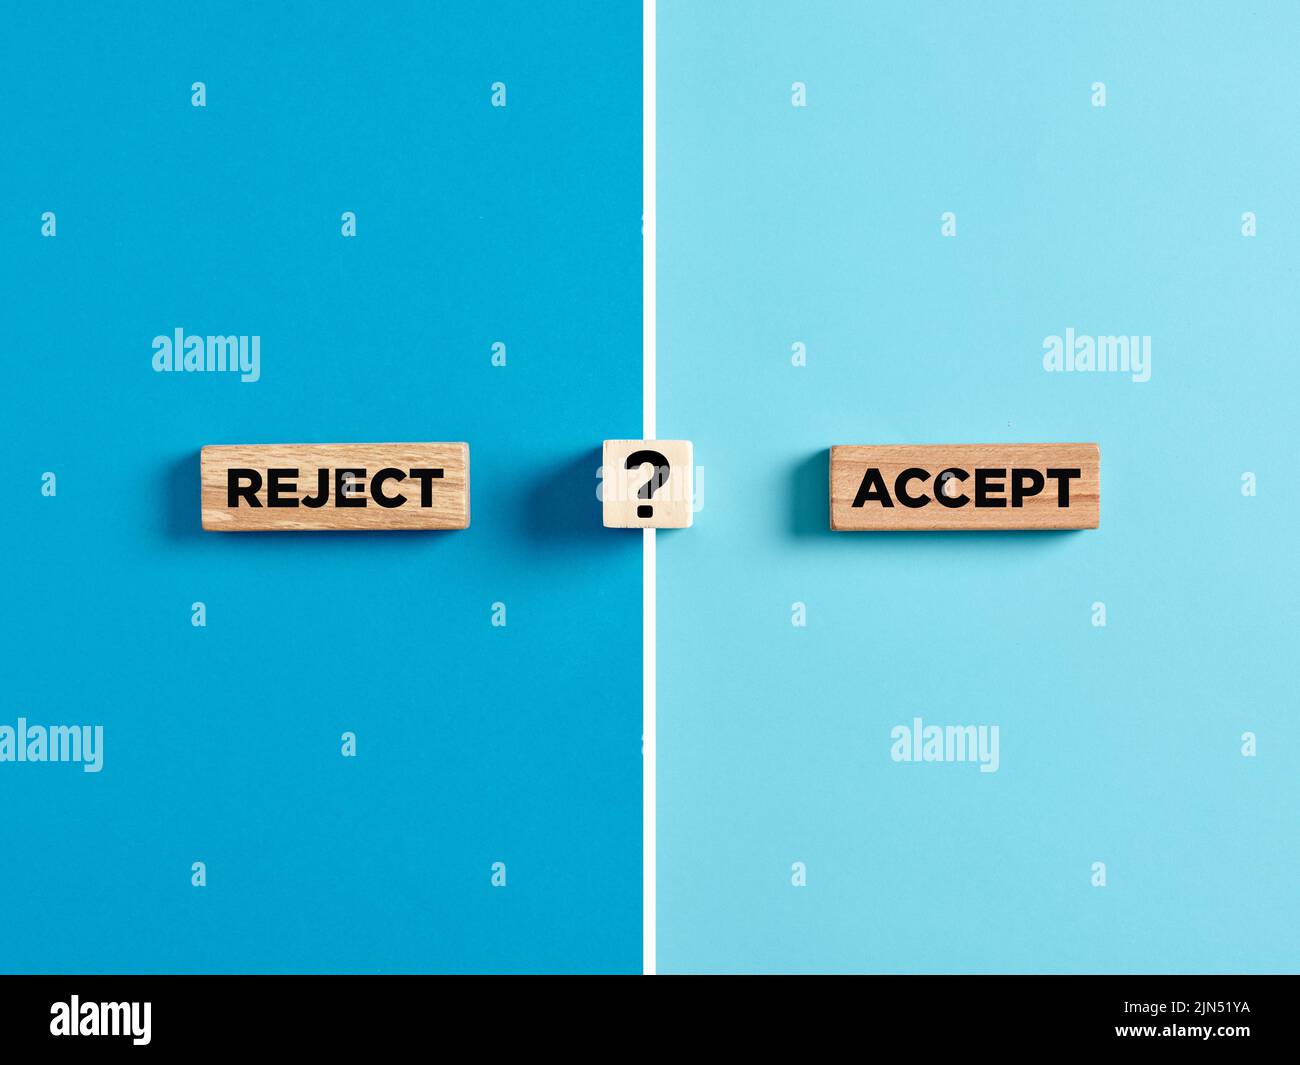 The words reject and accept on wooden blocks with question mark symbol. Dilemma or choice between to approve or to refuse an application concept. Stock Photo